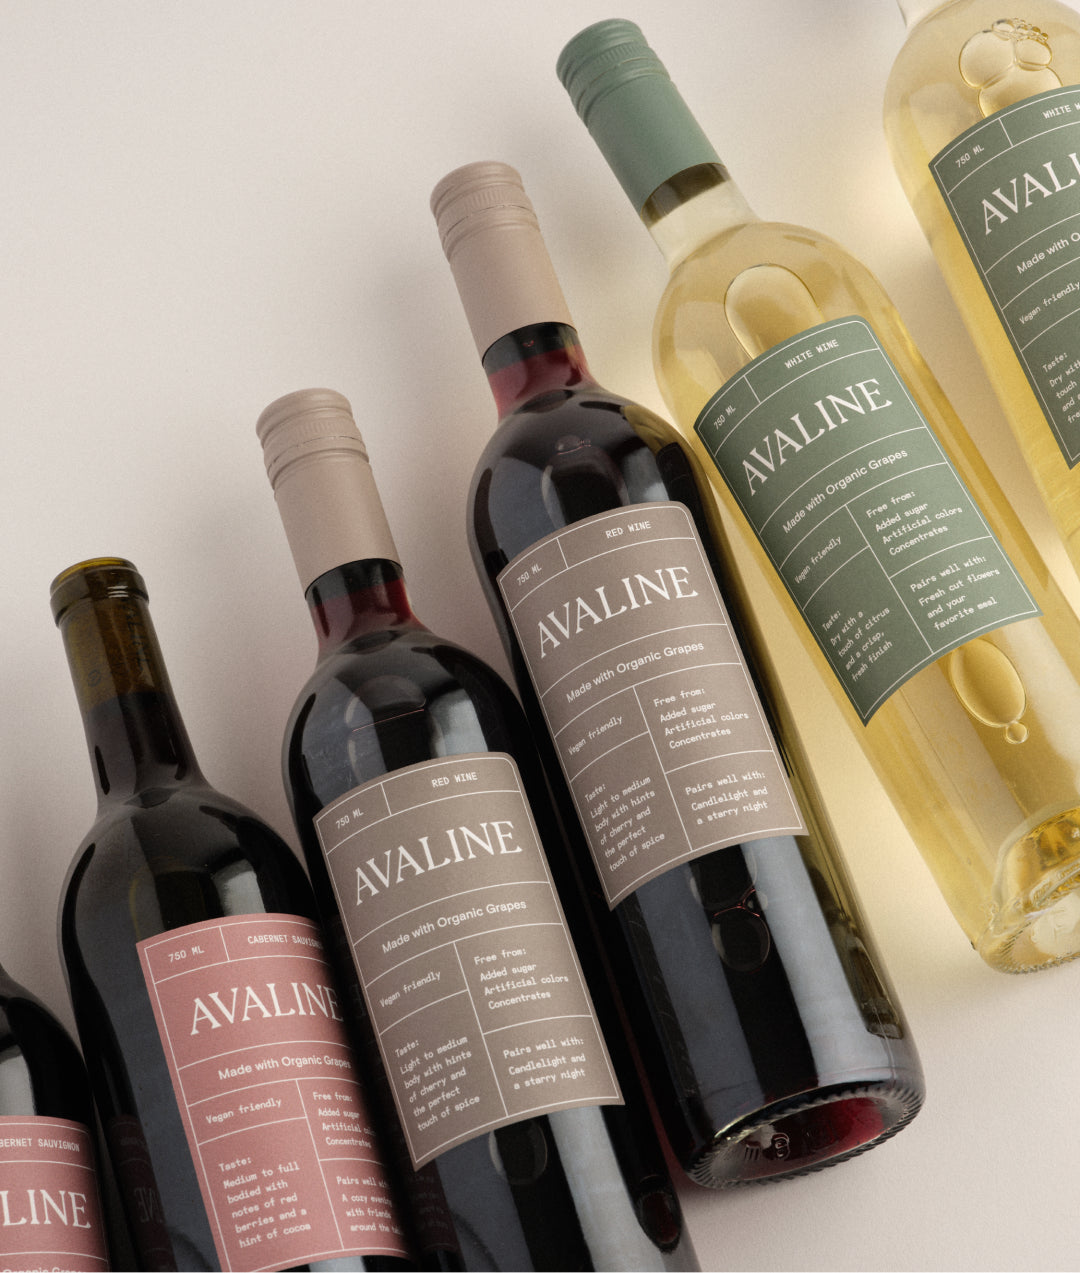 A lineup of wine bottles lying down on a table featuring Avaline White, Red, and Cabernet Sauvignon against a white background.